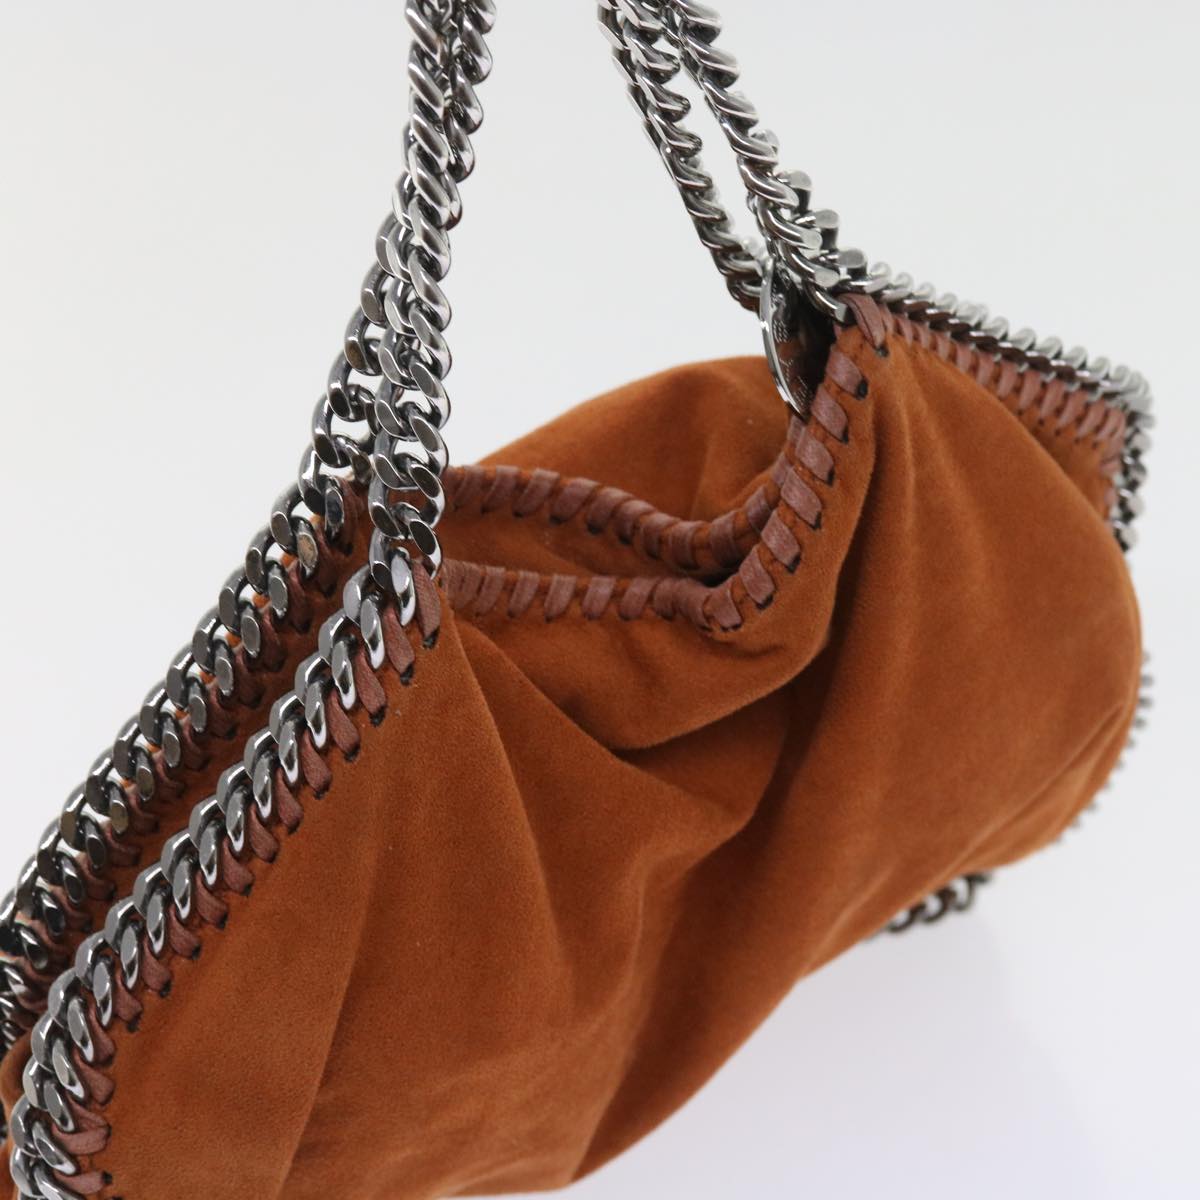 Stella MacCartney Chain Falabella Tote Bag Suede Brown 234387 Auth bs8263